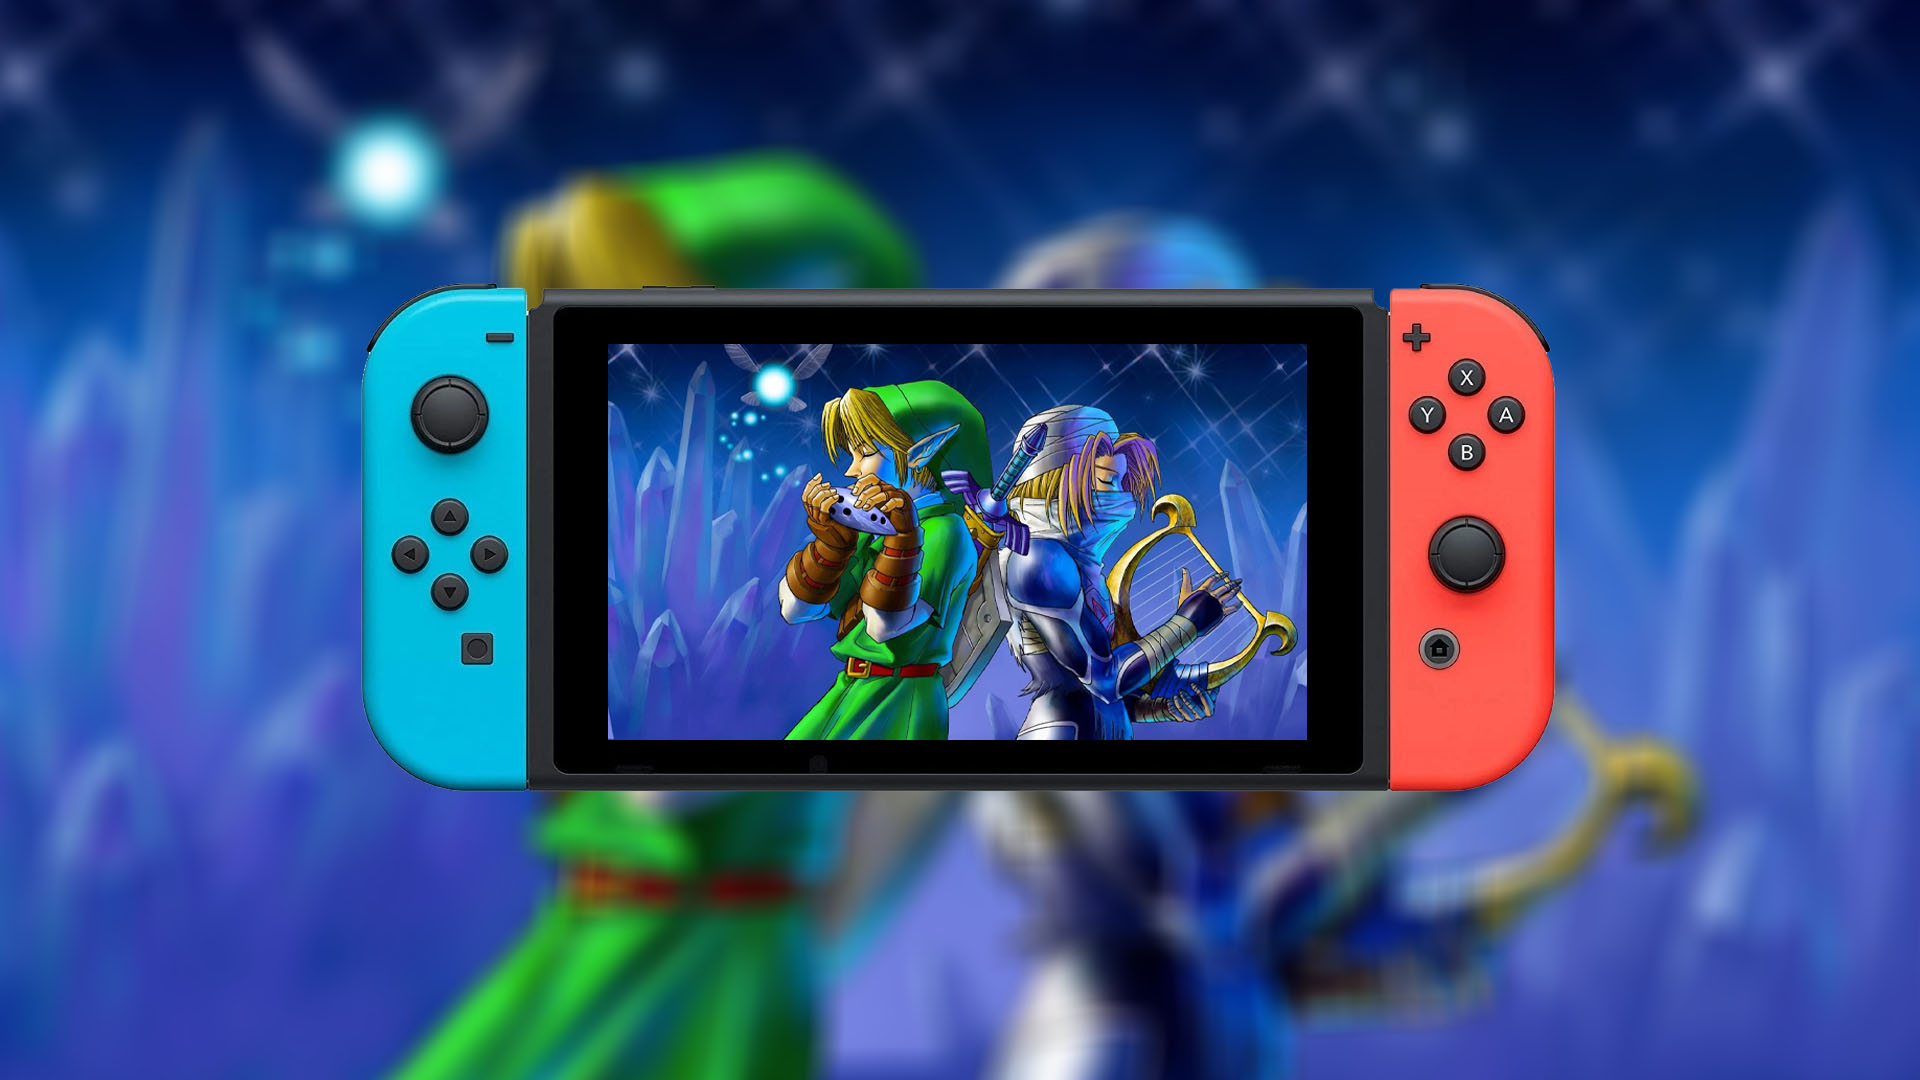 Ocarina of Time & Majora's Mask for Nintendo Switch, is the legend of zelda  ocarina of time on the nintendo switch